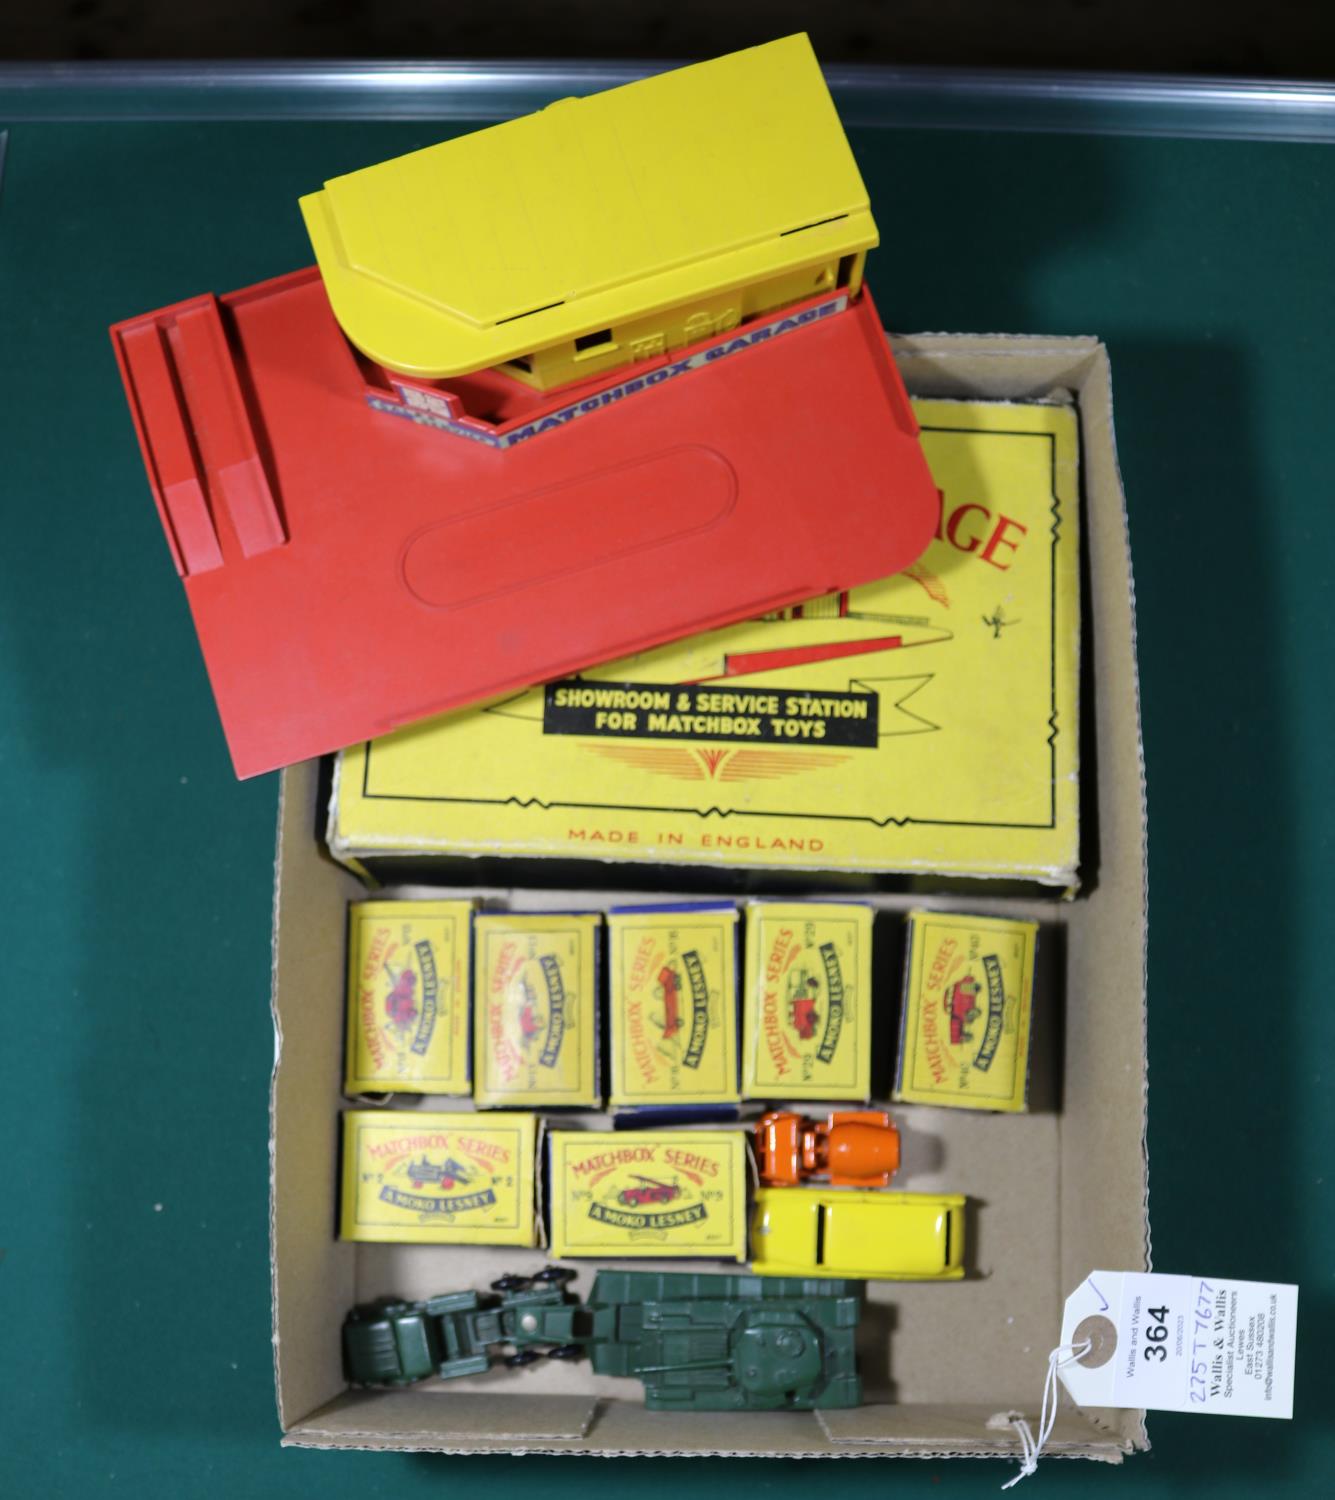 12x Matchbox Series. Including; MG1A; a Matchbox Garage (Showroom & Service Station) with red base